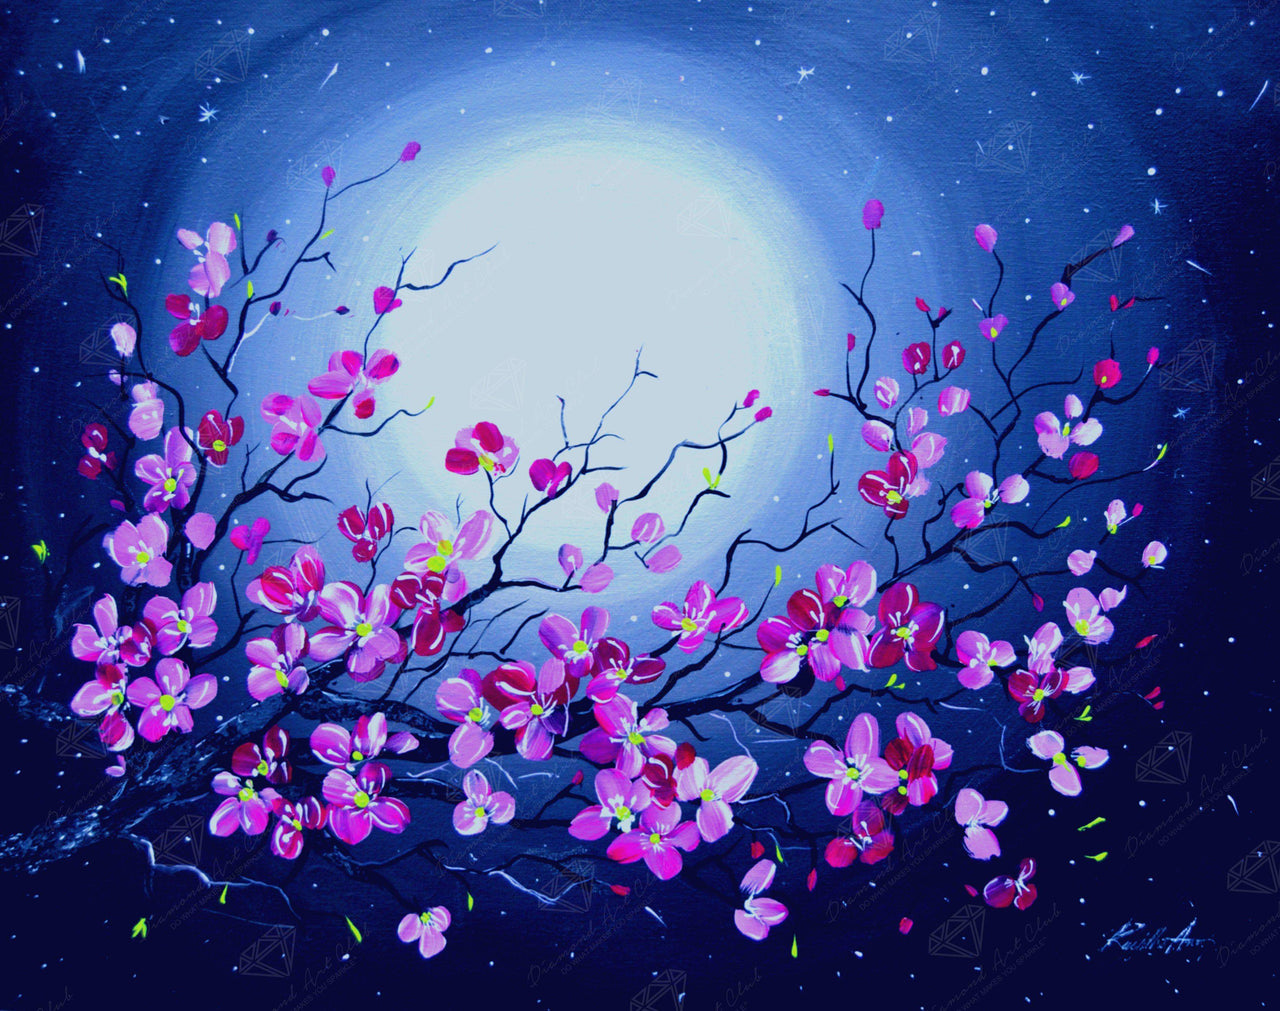 Diamond Painting Moonlight 28" x 22" (71cm x 56cm) / Round With 23 Colors Including 4 ABs / 50,148